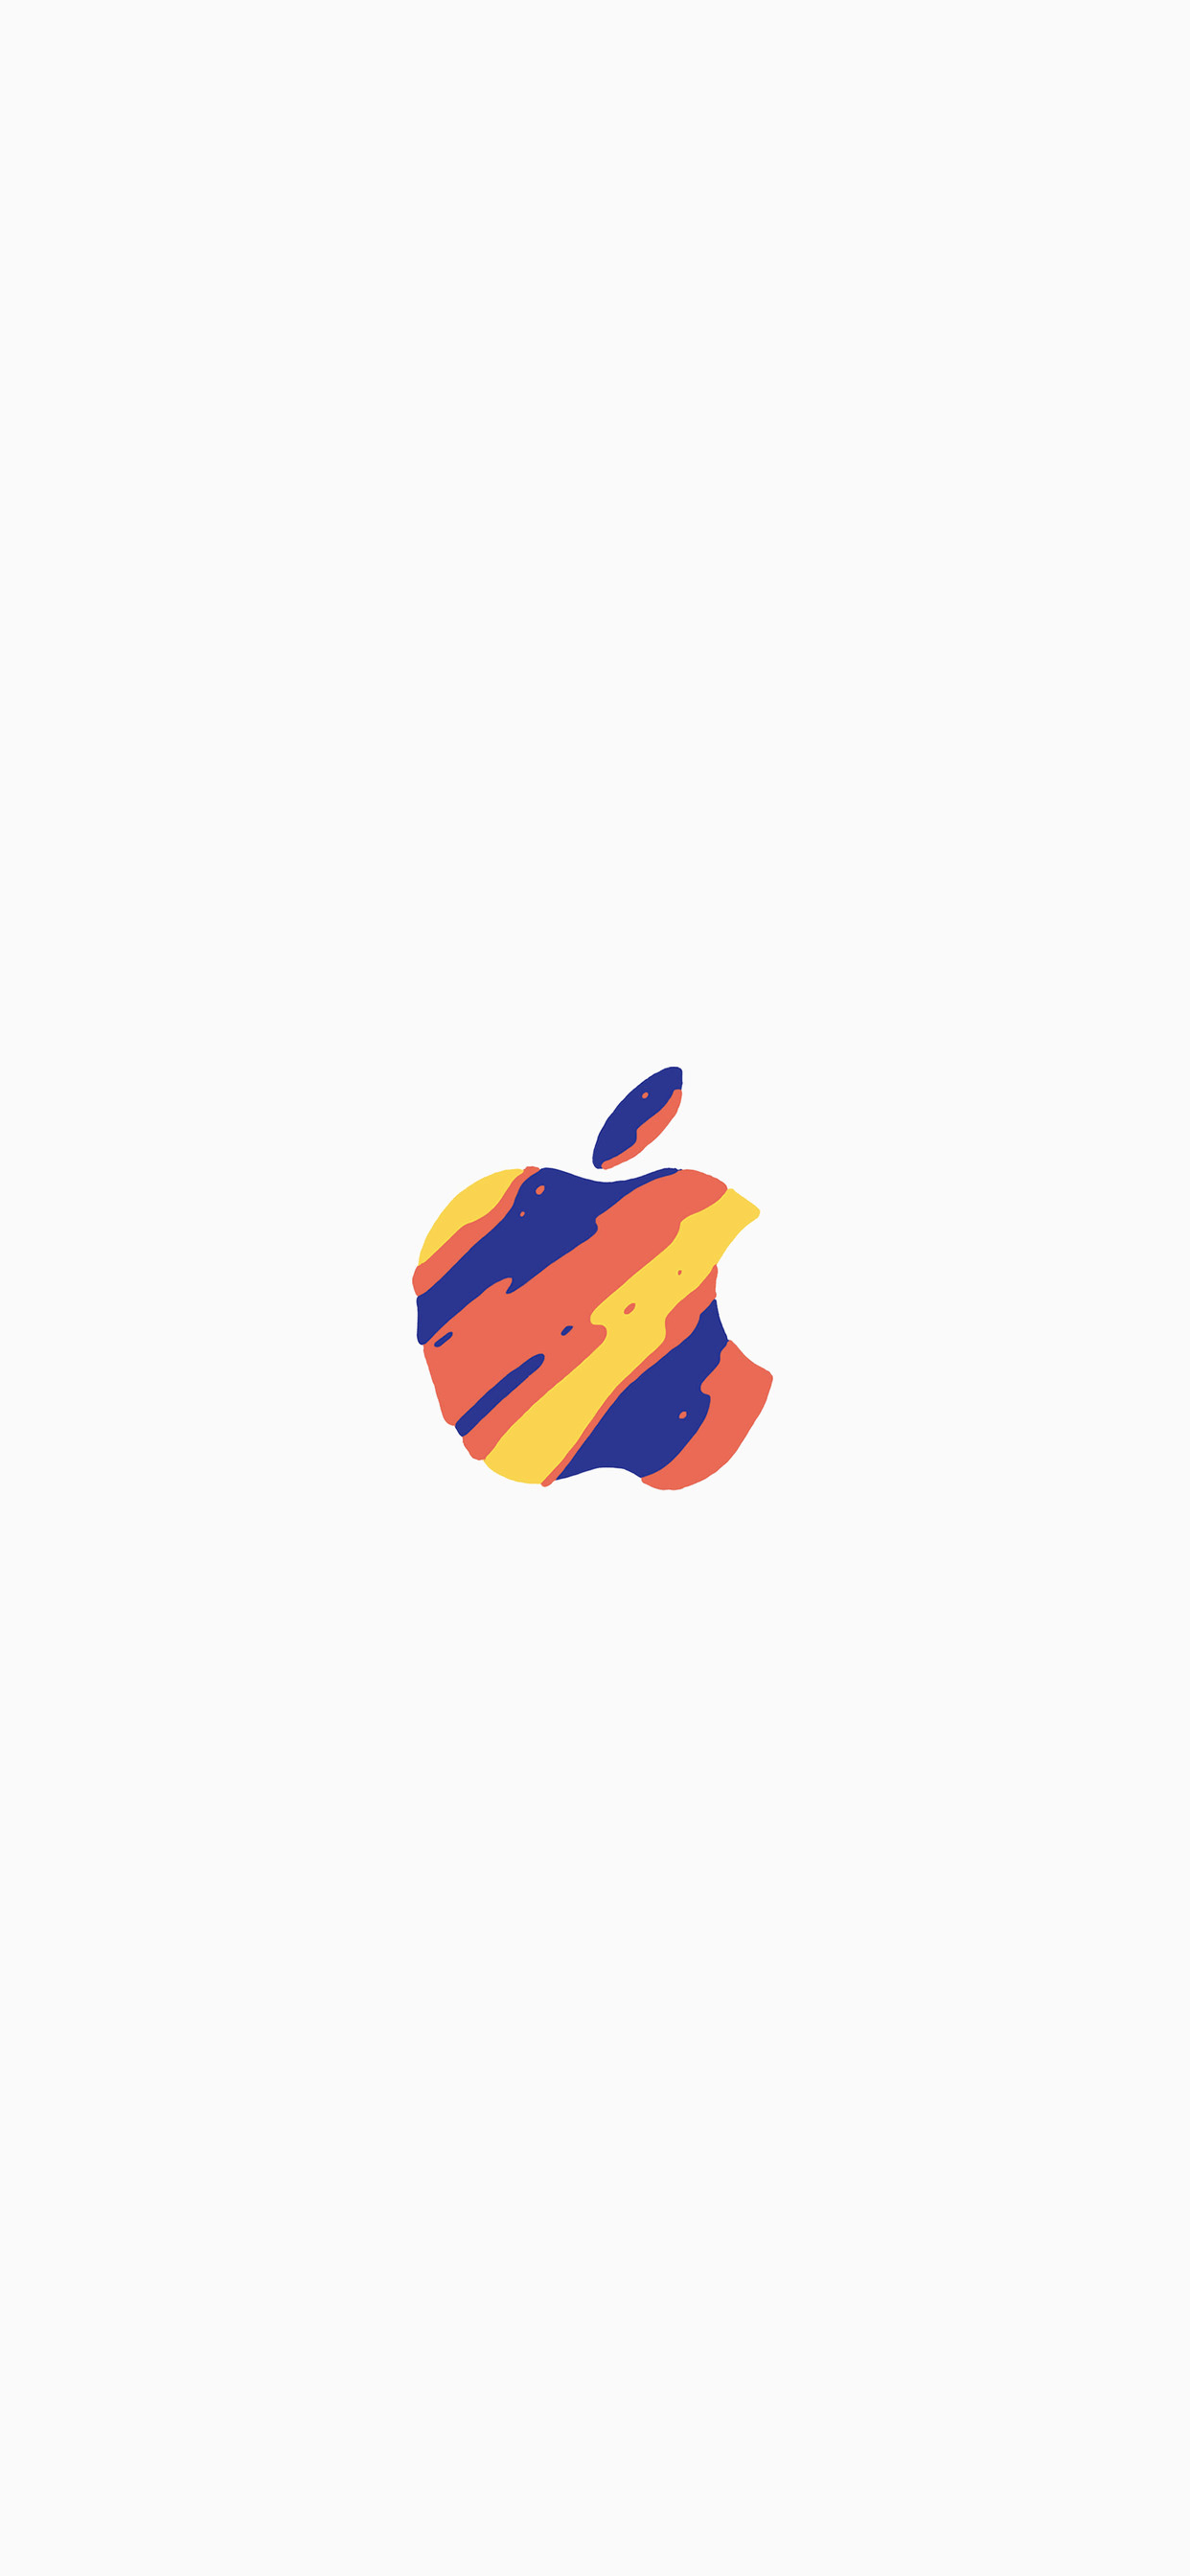 All Apple Logo - There's more in the making: 33 Apple logo wallpapers